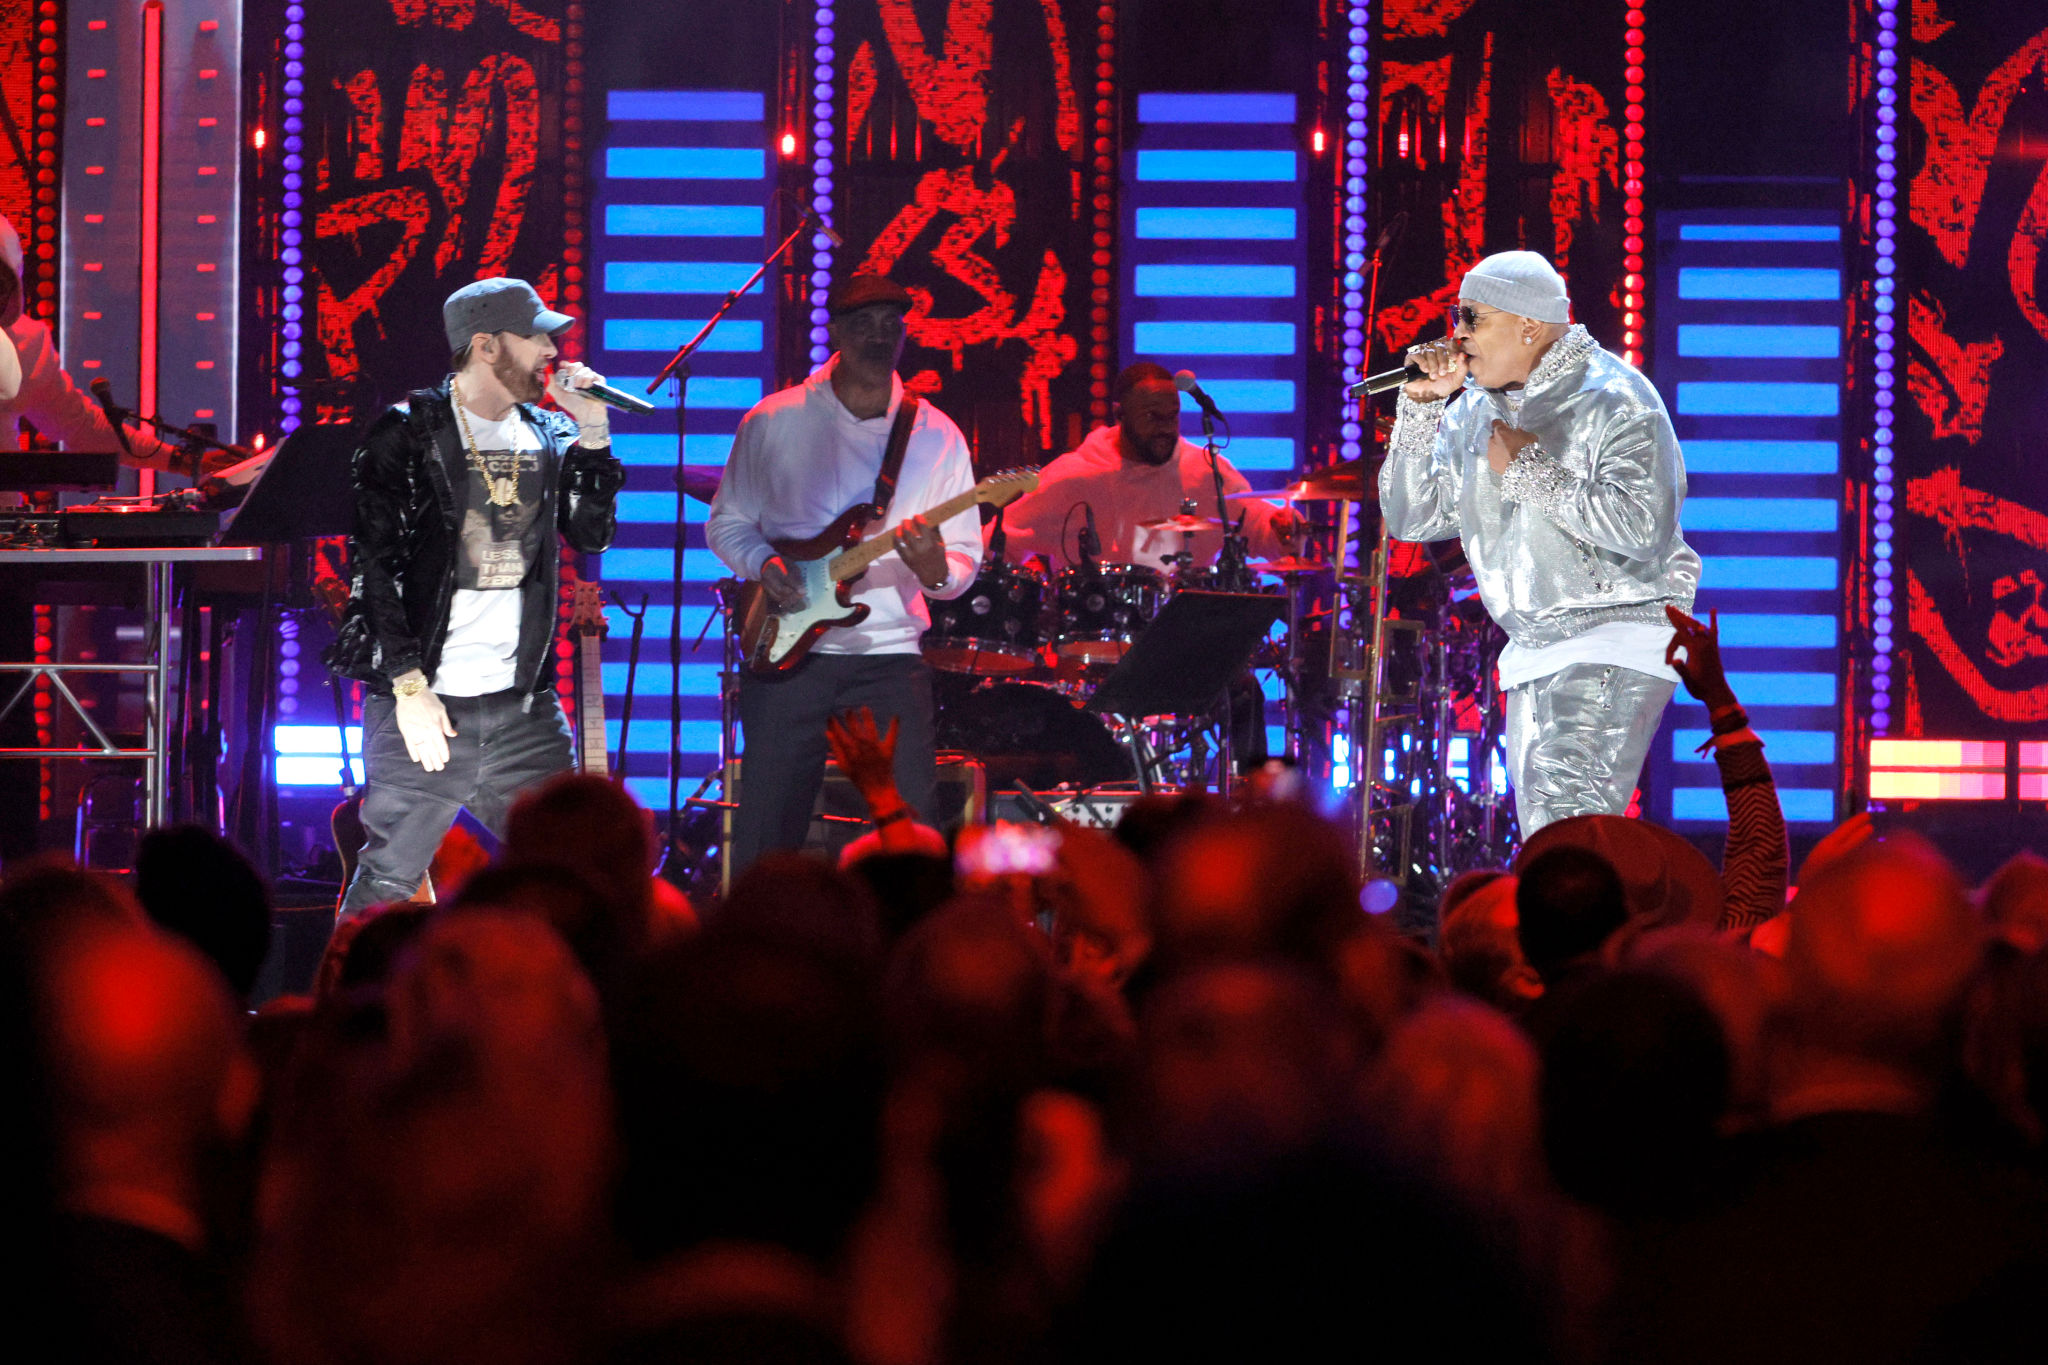 CLEVELAND, OHIO - OCTOBER 30: Eminem (L) and LL Cool J perform onstage during the 36th Annual Rock & Roll Hall Of Fame Induction Ceremony at Rocket Mortgage Fieldhouse on October 30, 2021 in Cleveland, Ohio. (Photo by Michael Loccisano/Getty Images for The Rock and Roll Hall of Fame )